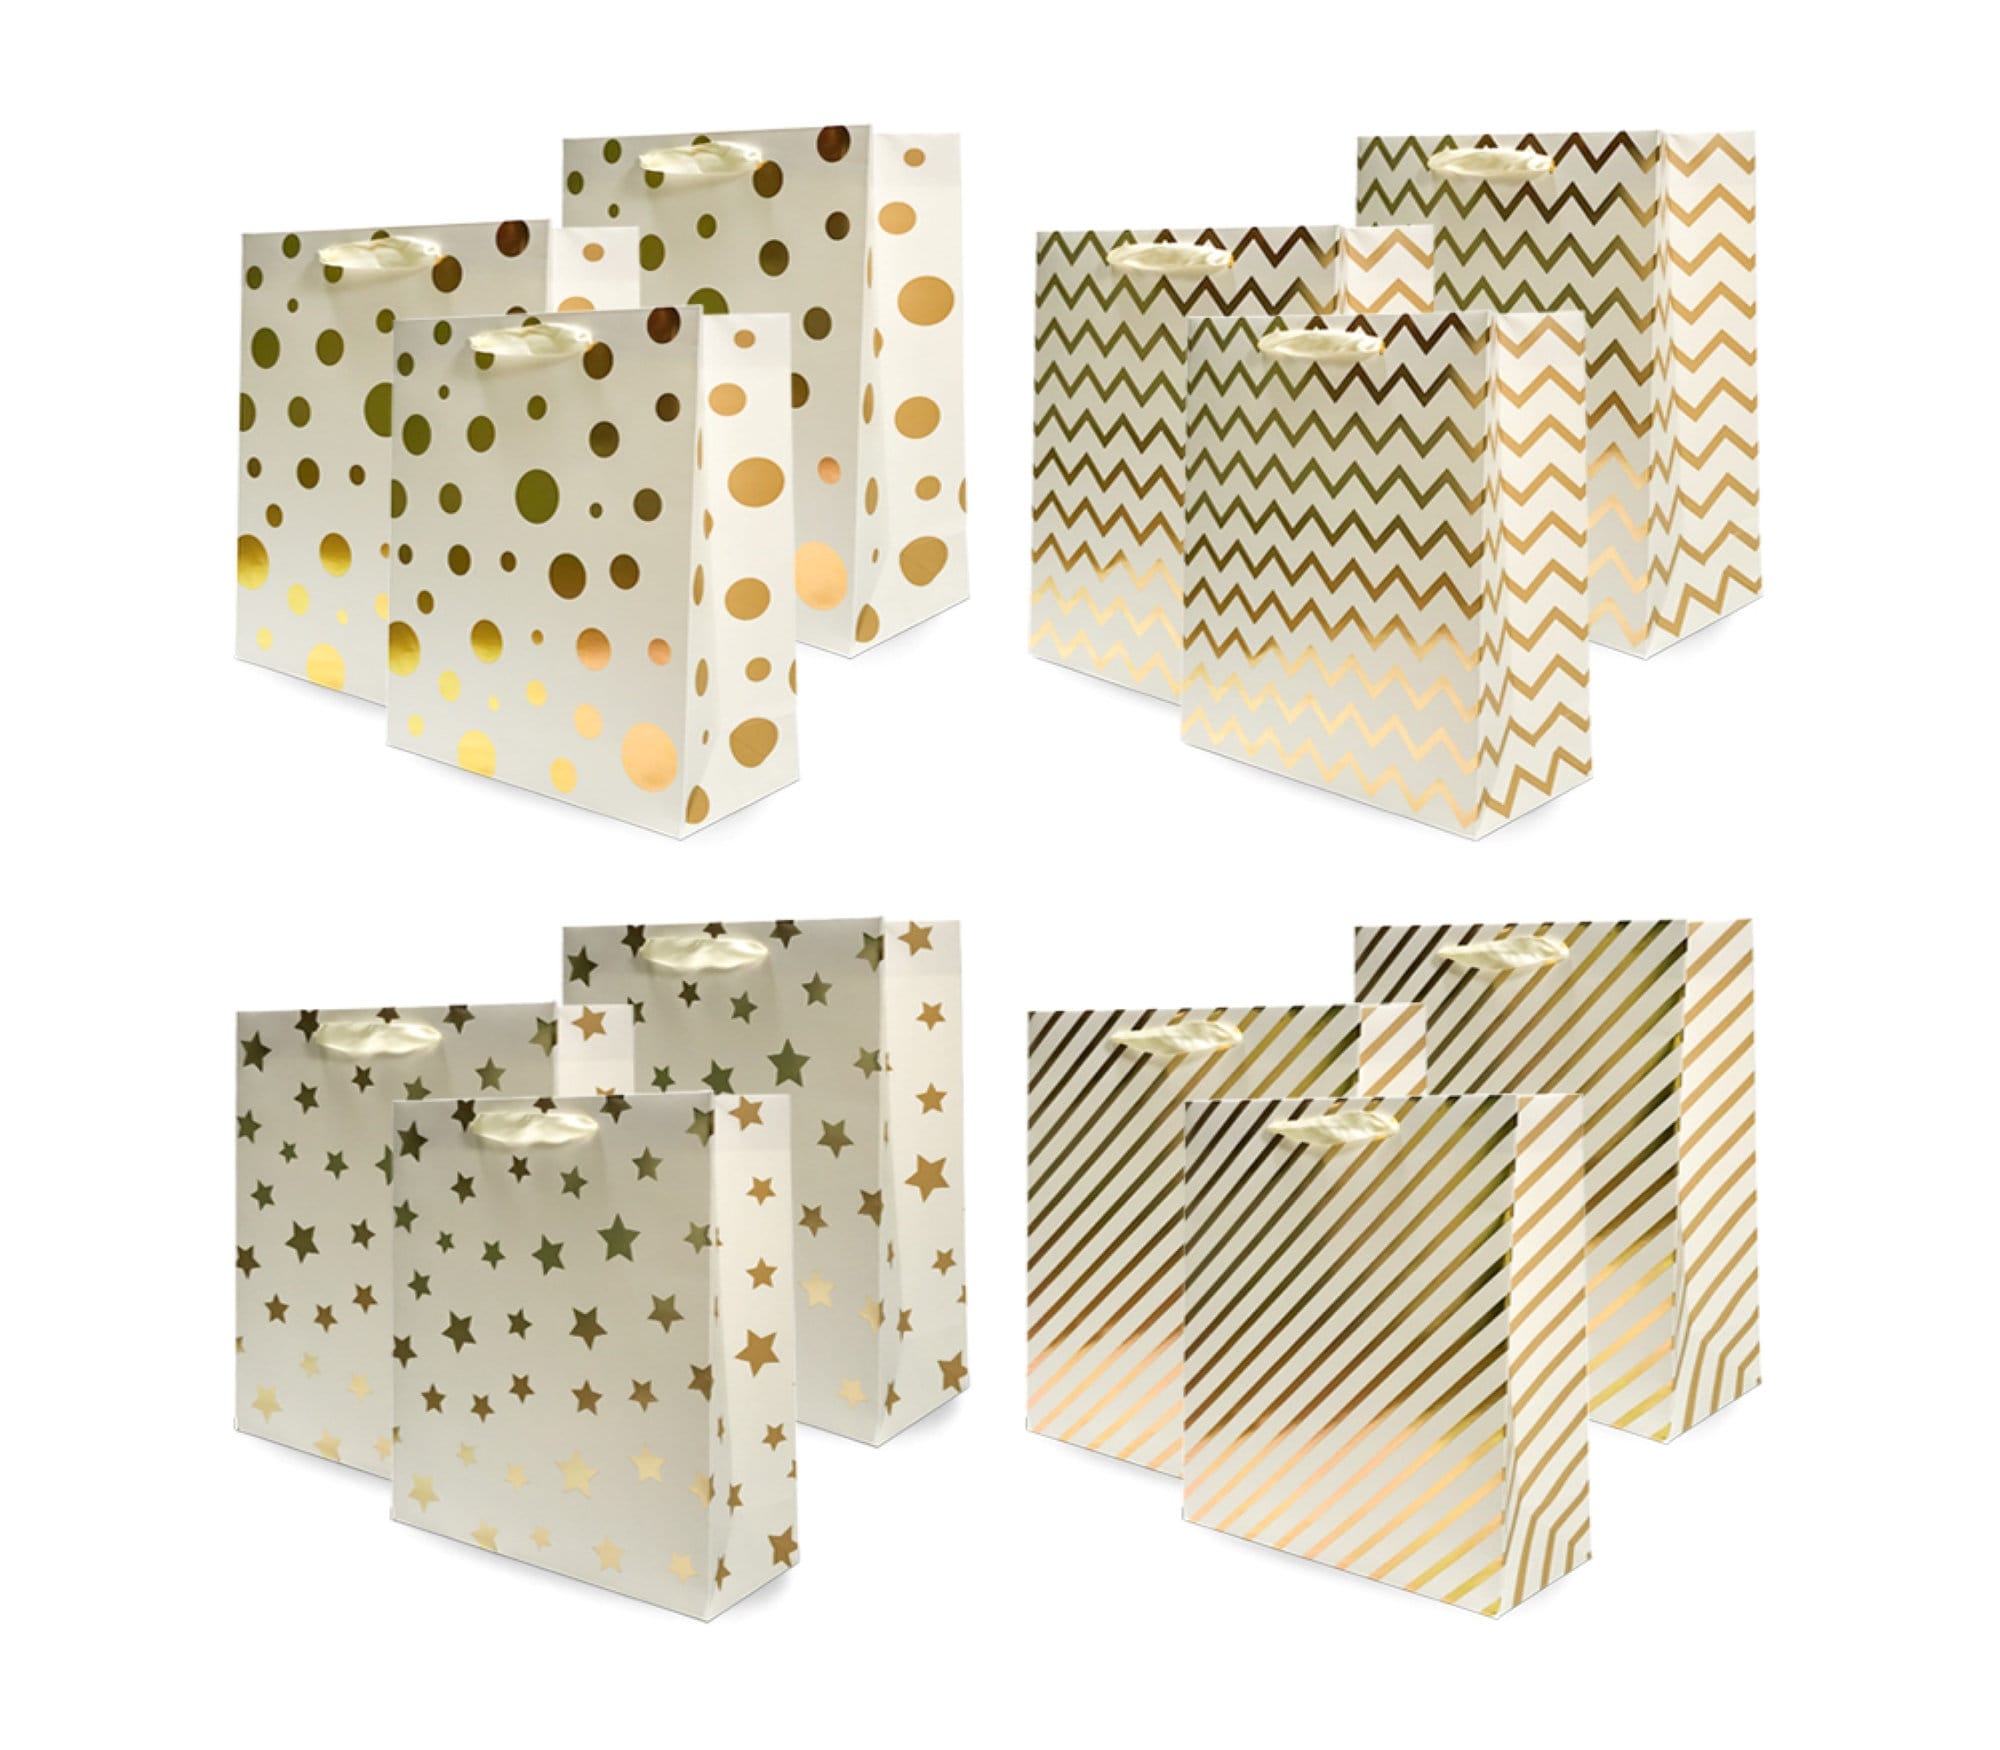 Gold Foil Gift bags with Handles, Designer Solid Gold Paper Gift